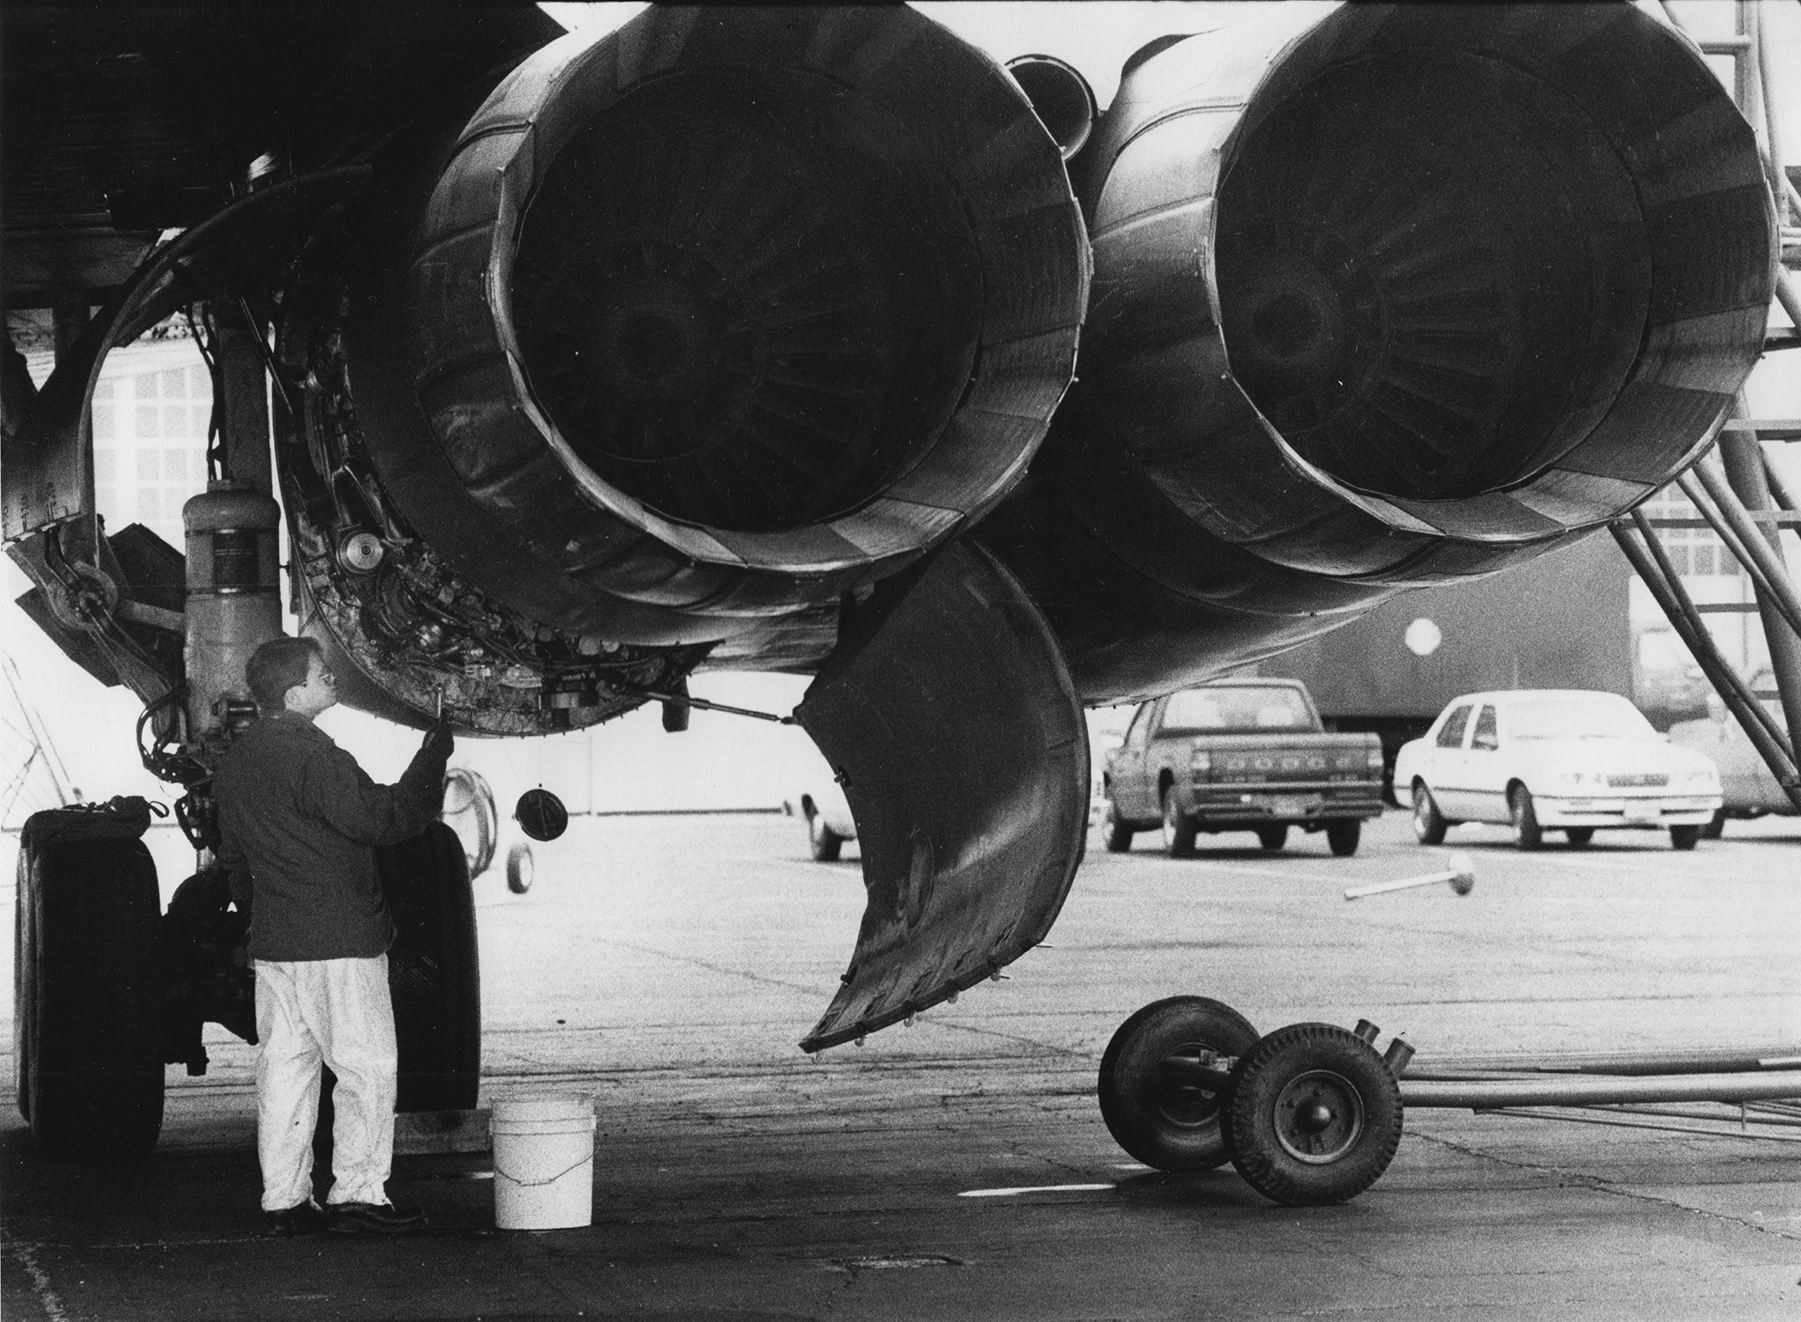 B-1A being prepped for display at the Air Force Museum, 1987